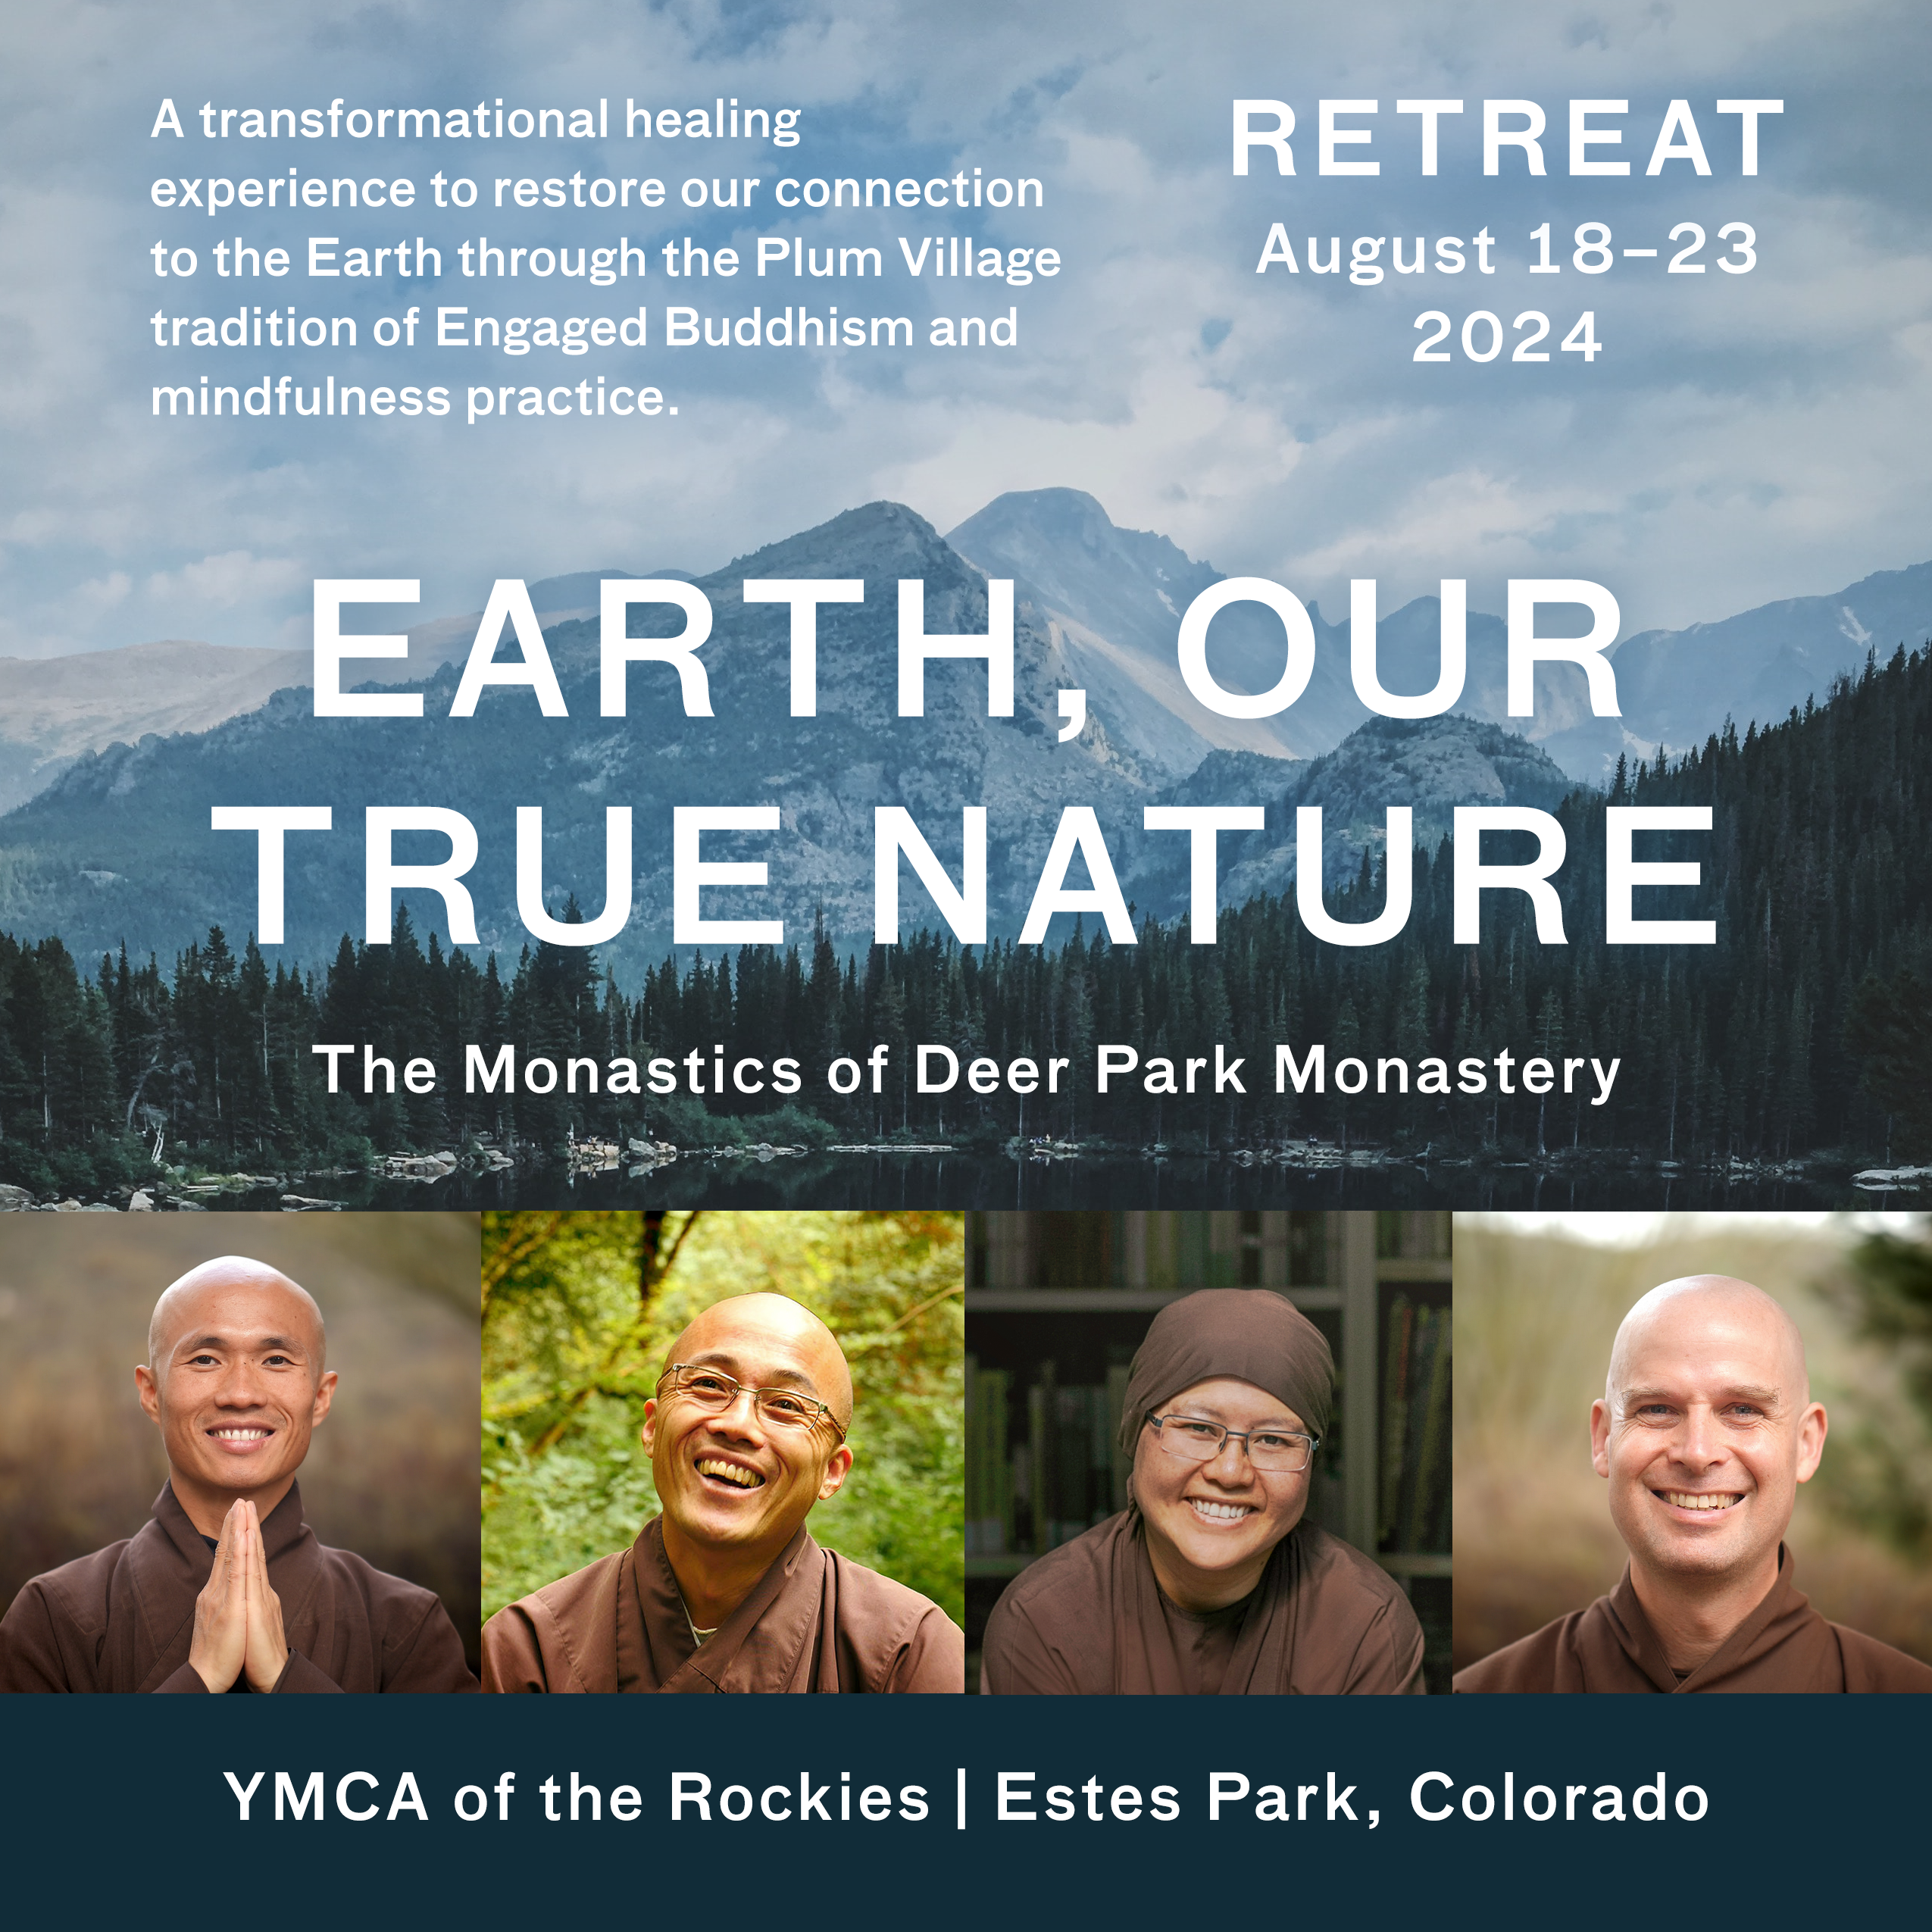 Earth, Our True Nature Retreat at the YMCA of the Rockies in Colorado